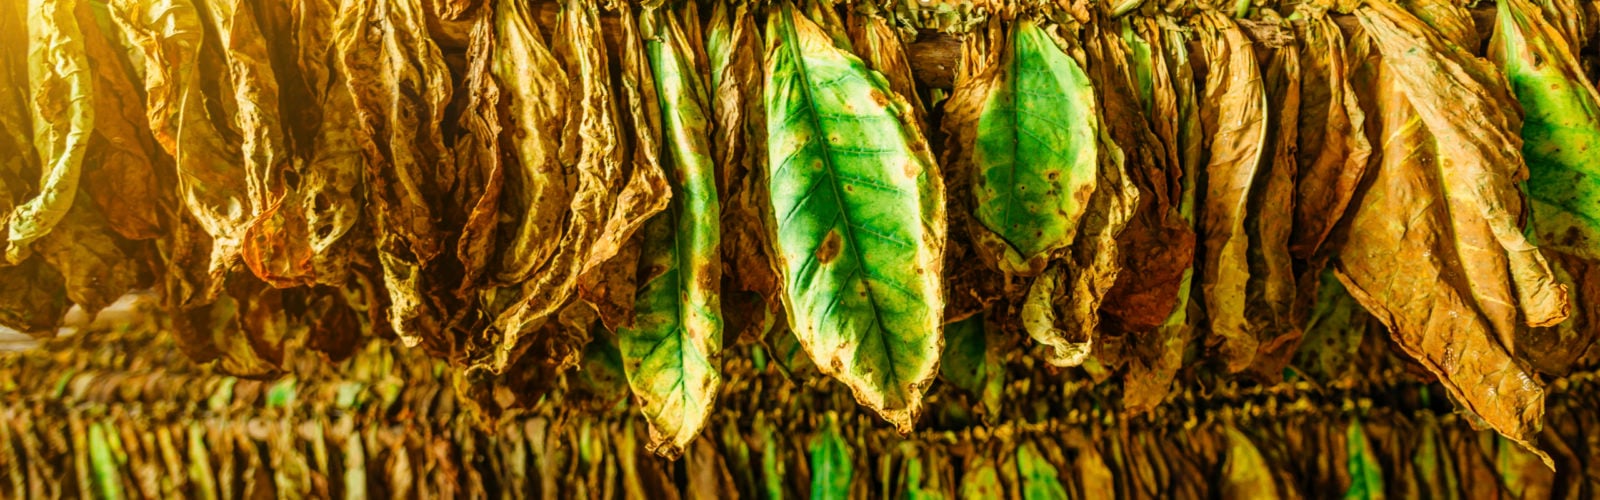 Tobacco leaves drying in the shed, Cuba